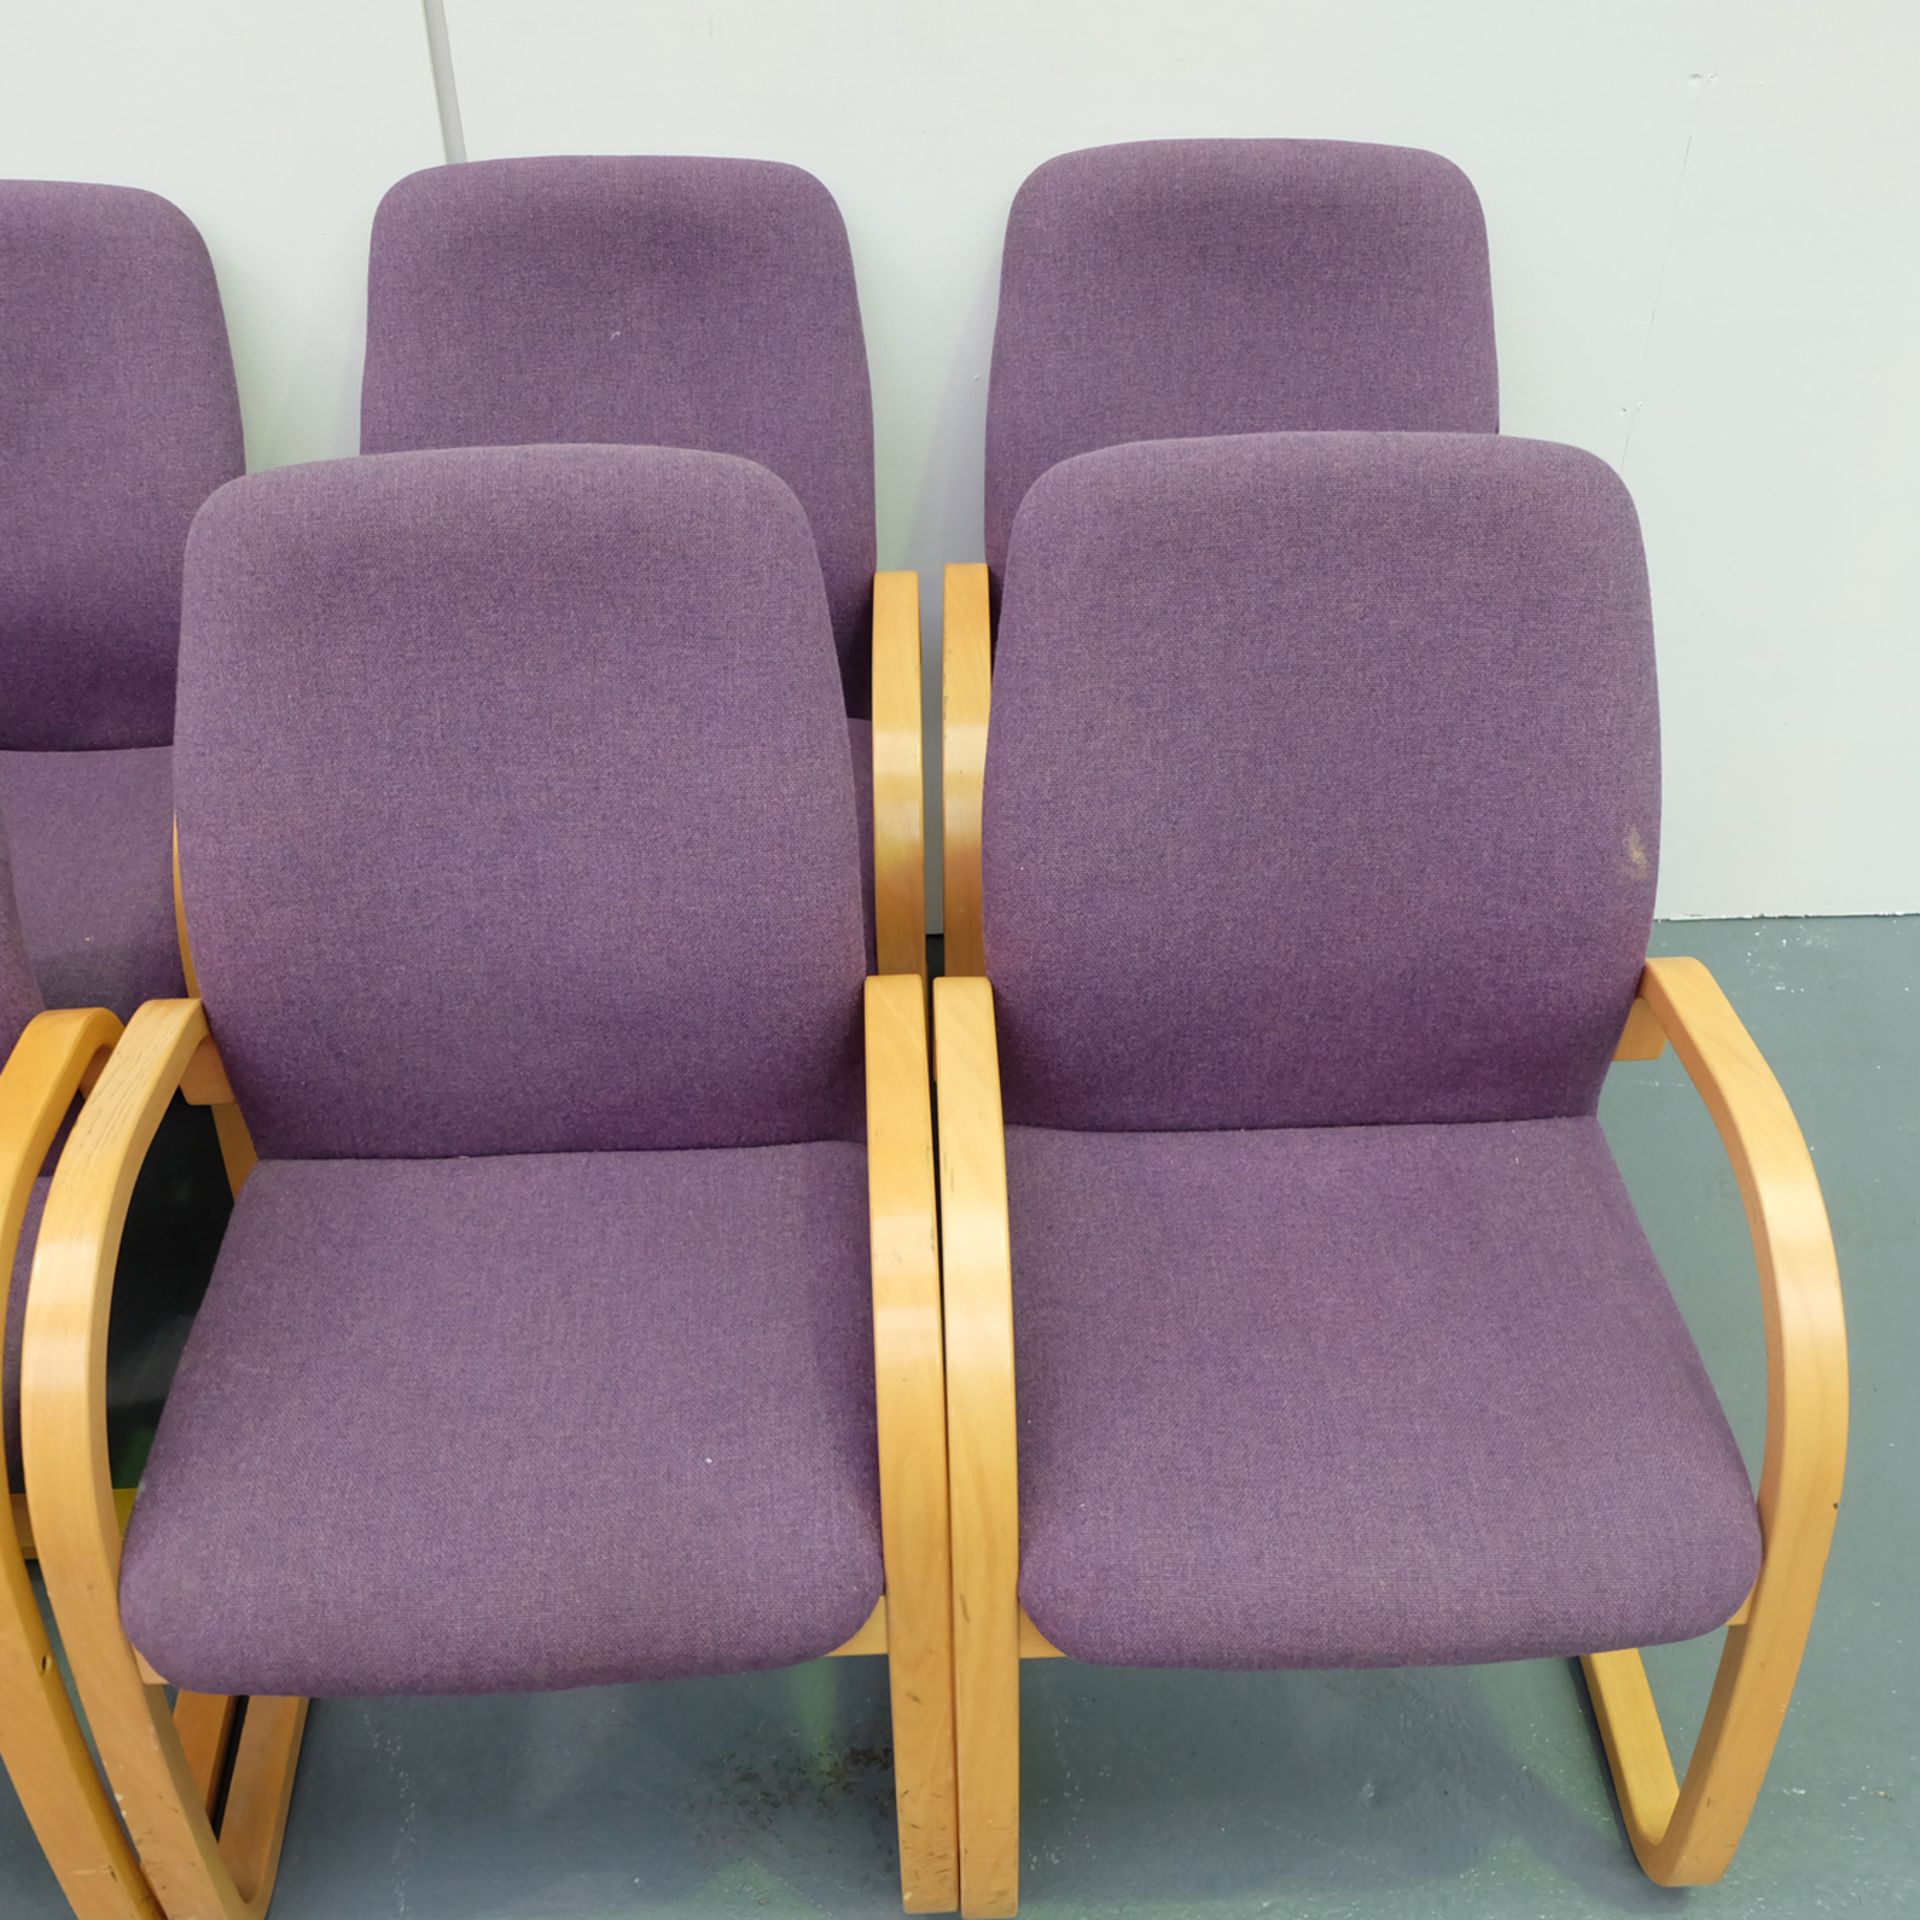 9 x Conference Chairs. - Image 3 of 5